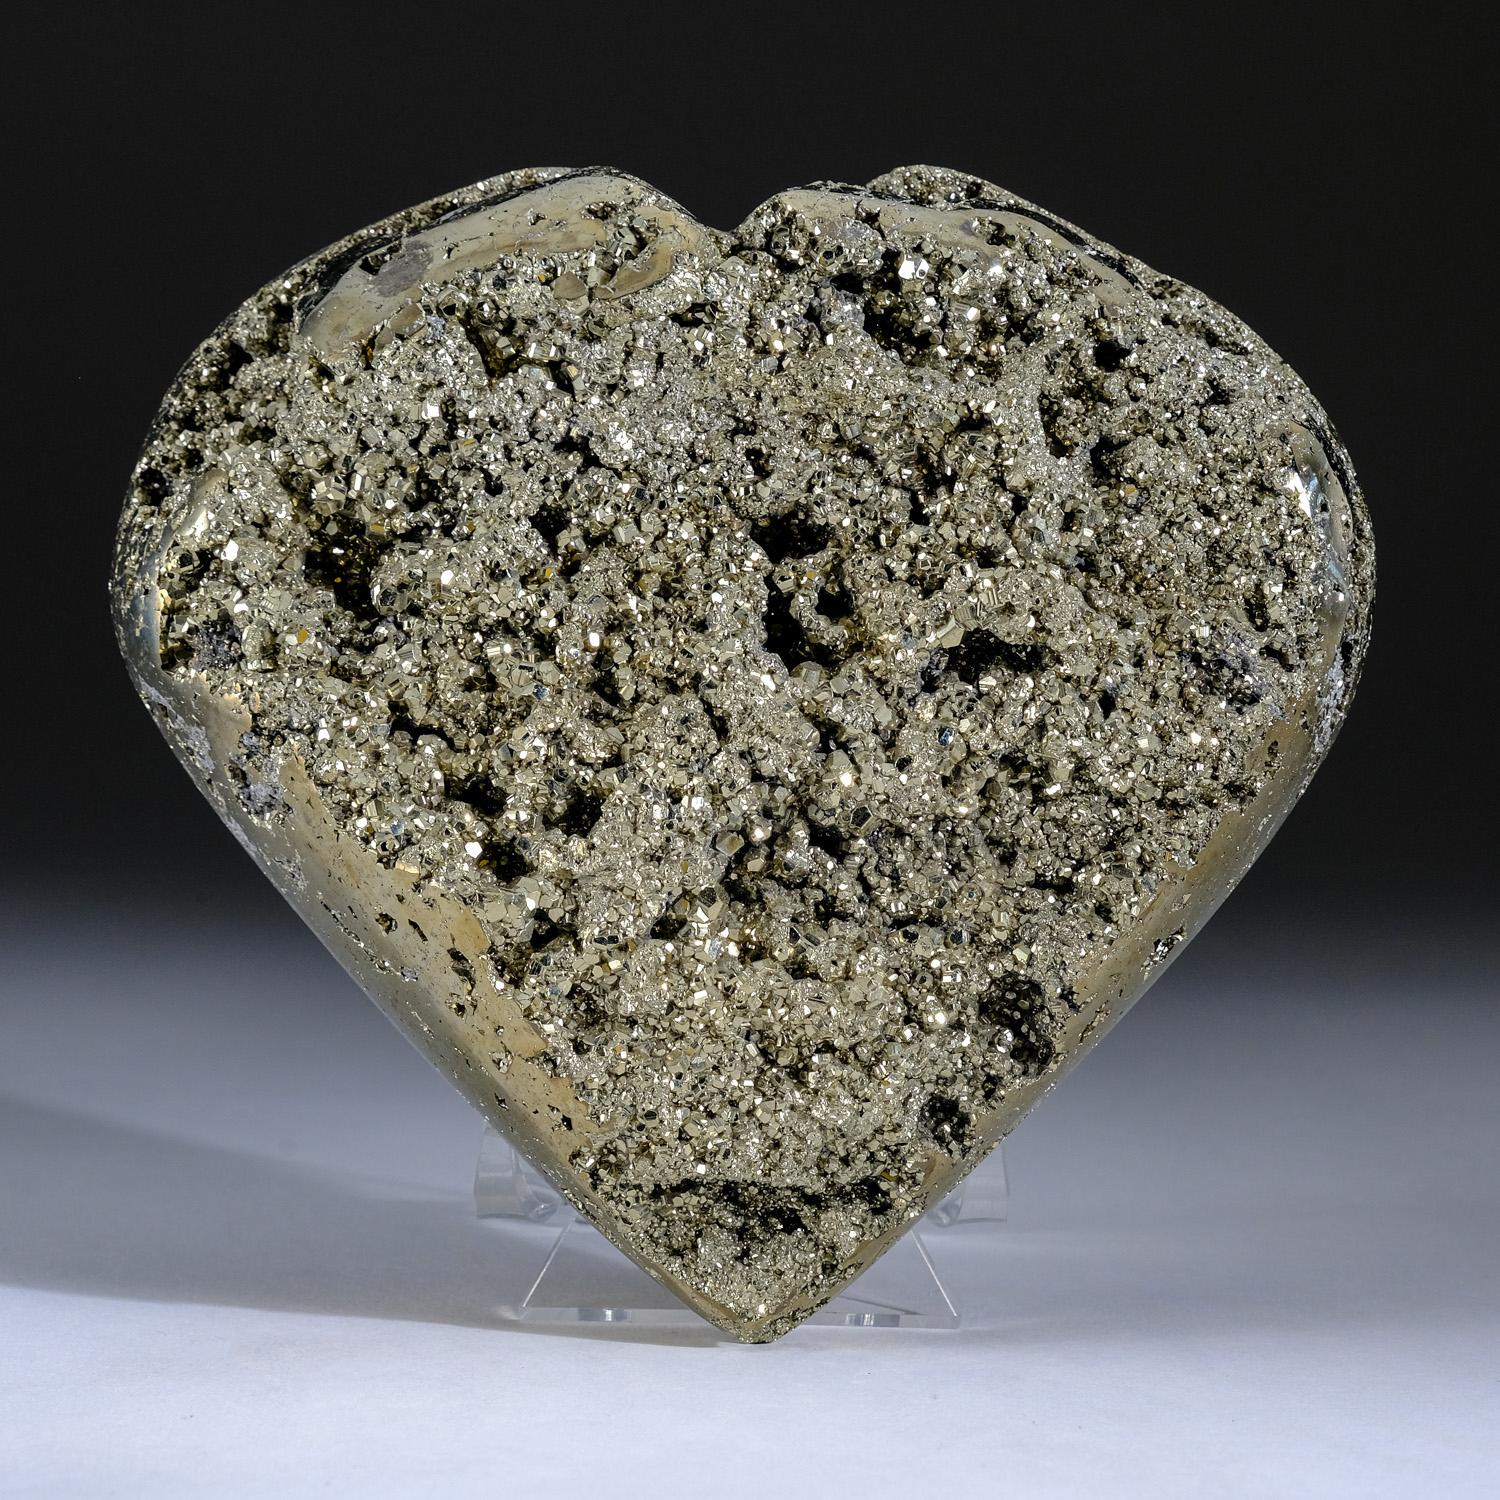 AAA-quality polished Pyrite heart from Peru. This mineral's metallic luster and pale brass-yellow hue gives it a superficial resemblance to gold. This piece is polished to a high mirror finish with mesmerizing crystal pockets revealing its natural